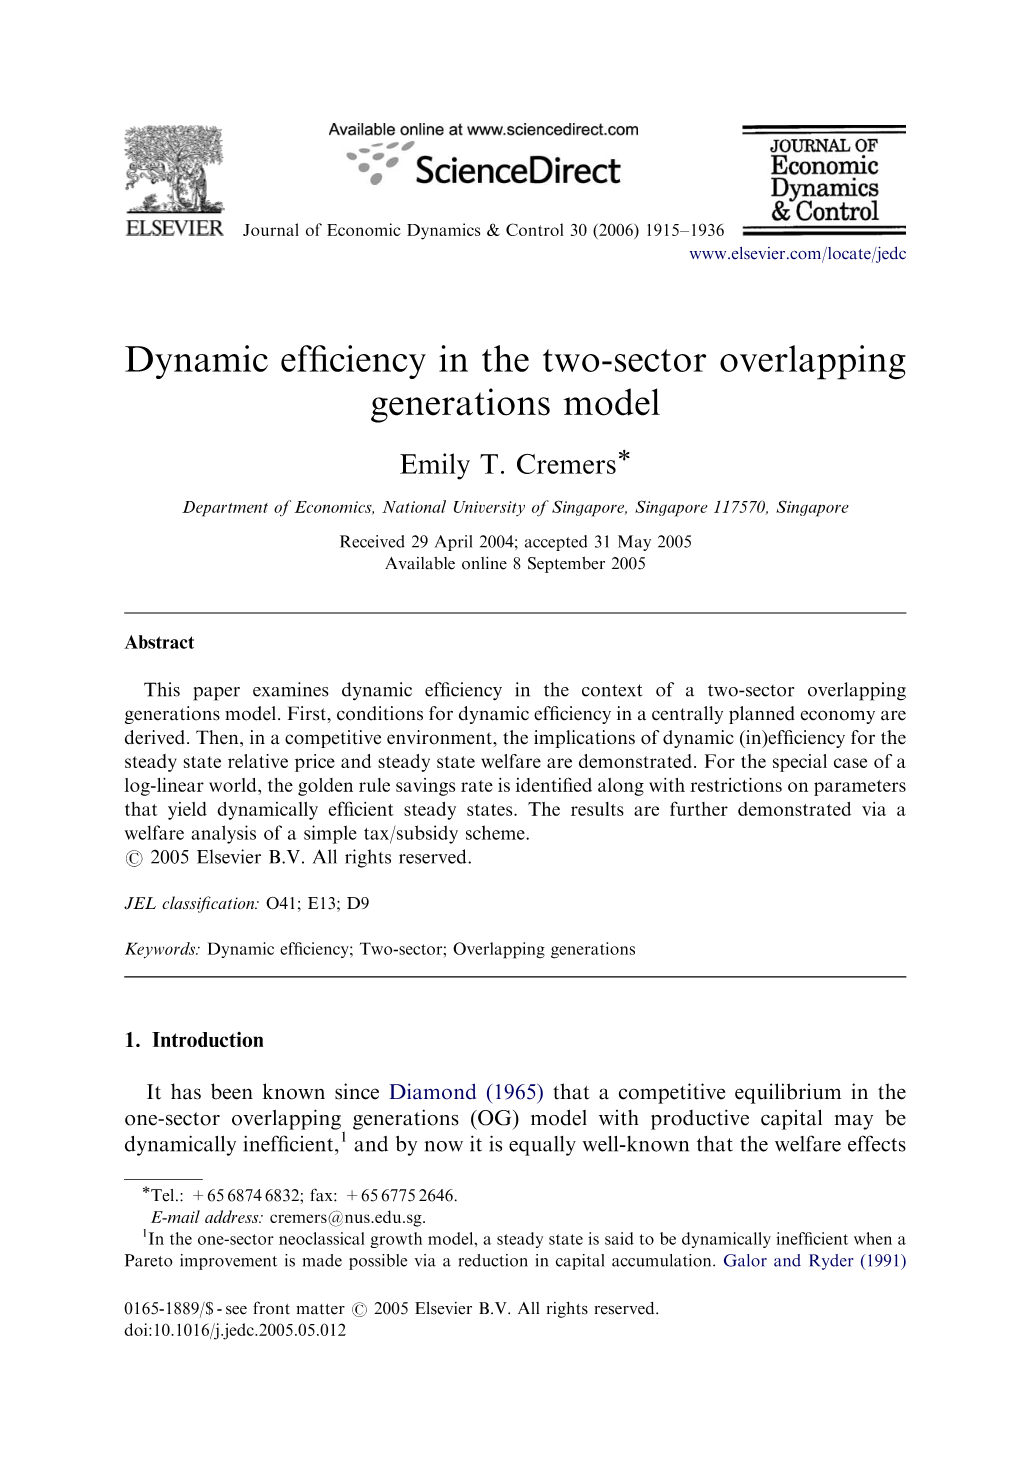 Dynamic Efficiency in the Two-Sector Overlapping Generations Model